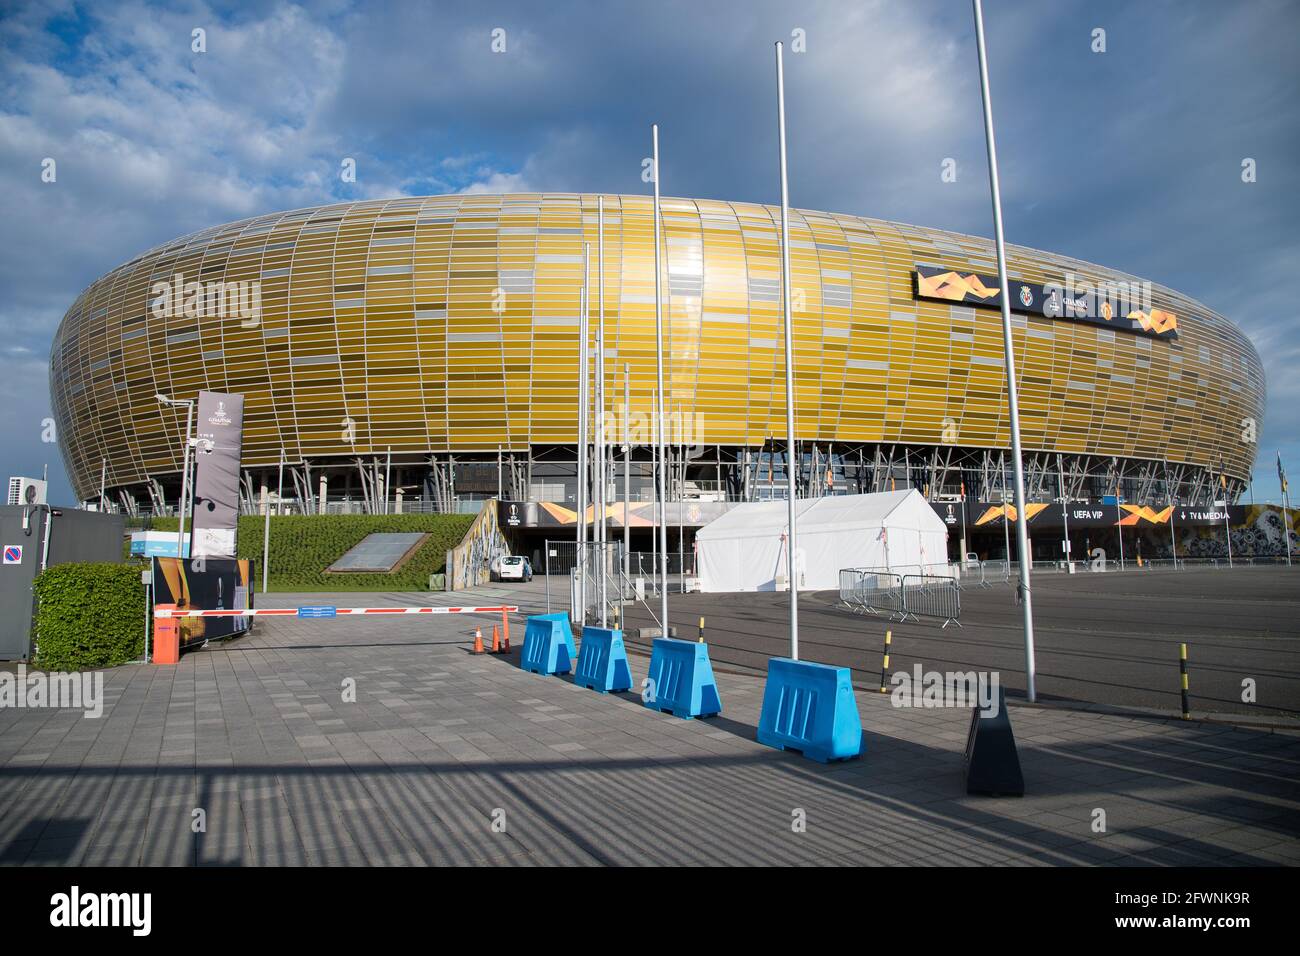 Polsat Plus Arena Gdansk, host of 2021 UEFA Europa League Final and home of Lechia Gdansk football team, in Gdansk, Poland